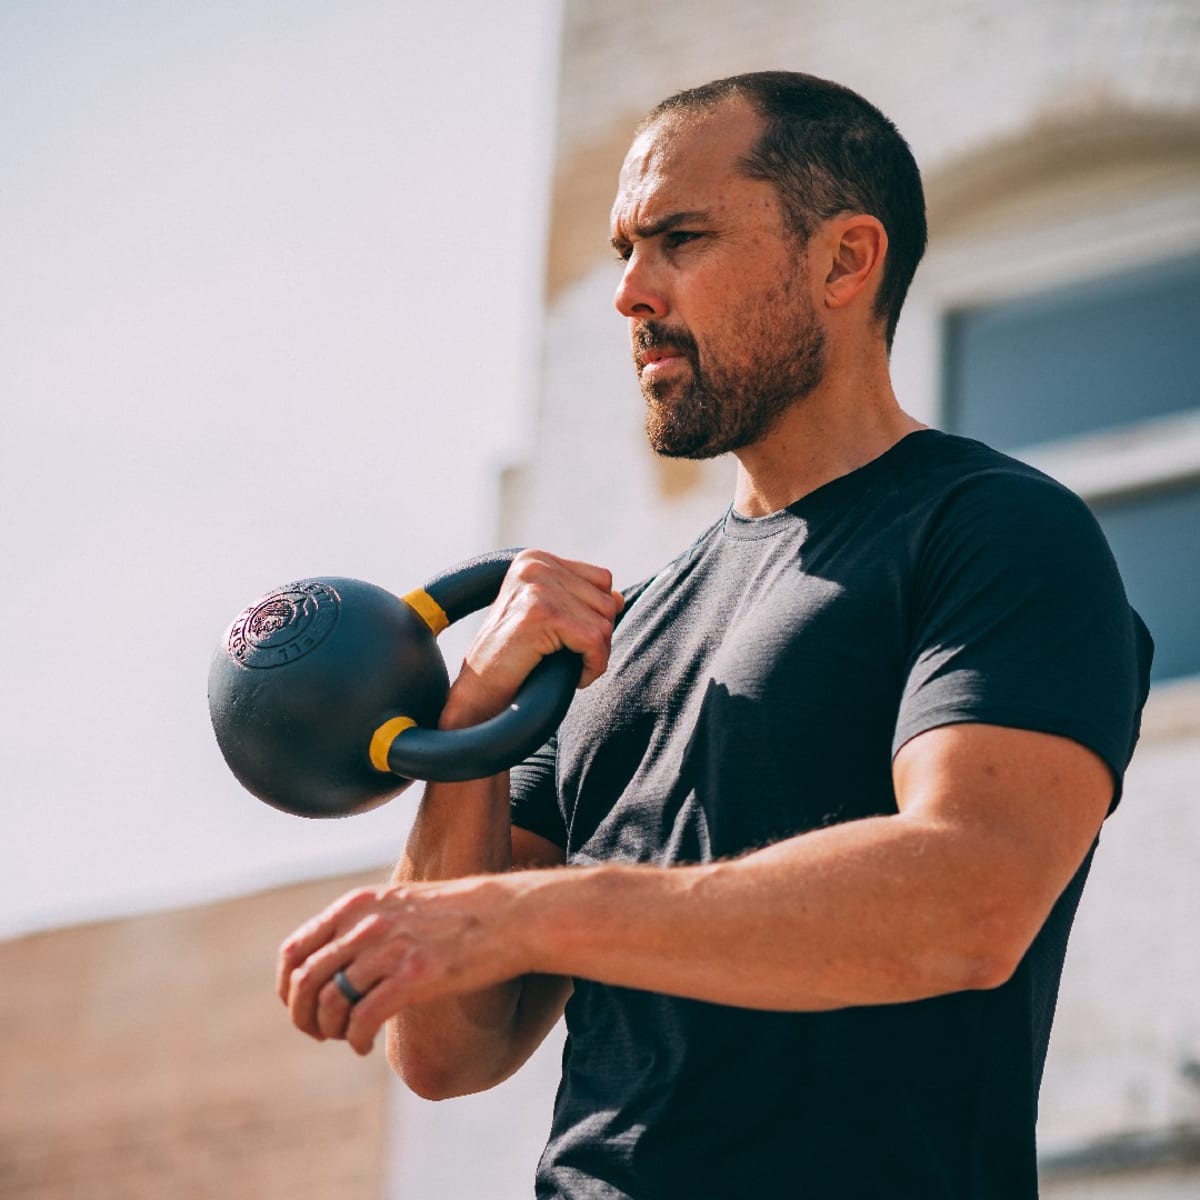 Kettlebell Shred Workouts for Men and Women